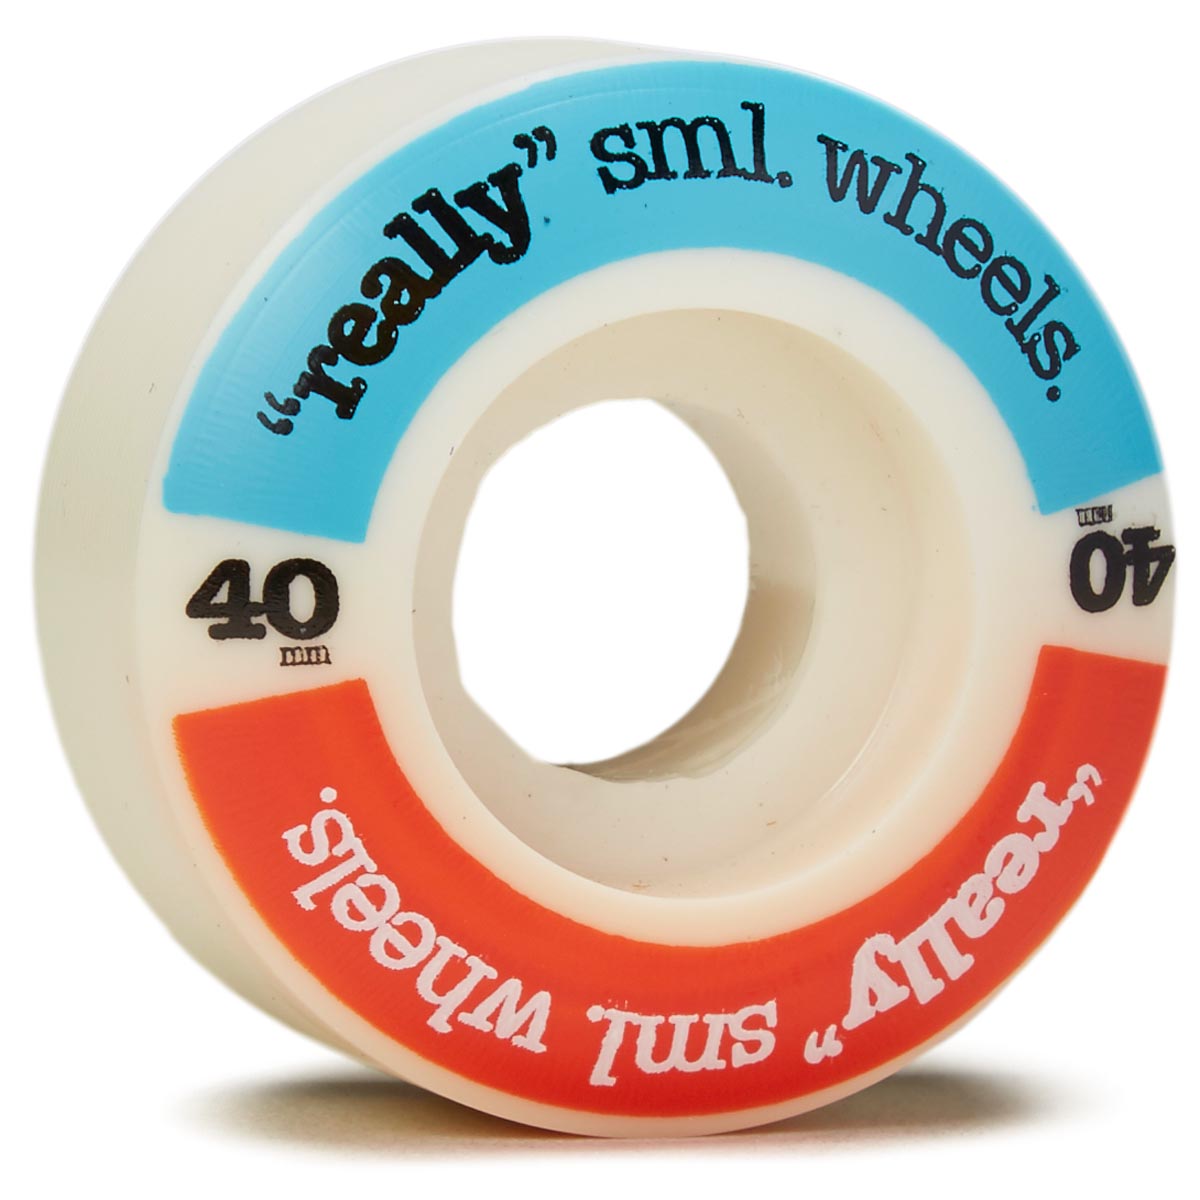 SML Really Sml 99a Skateboard Wheels - Red/Blue - 40mm image 1